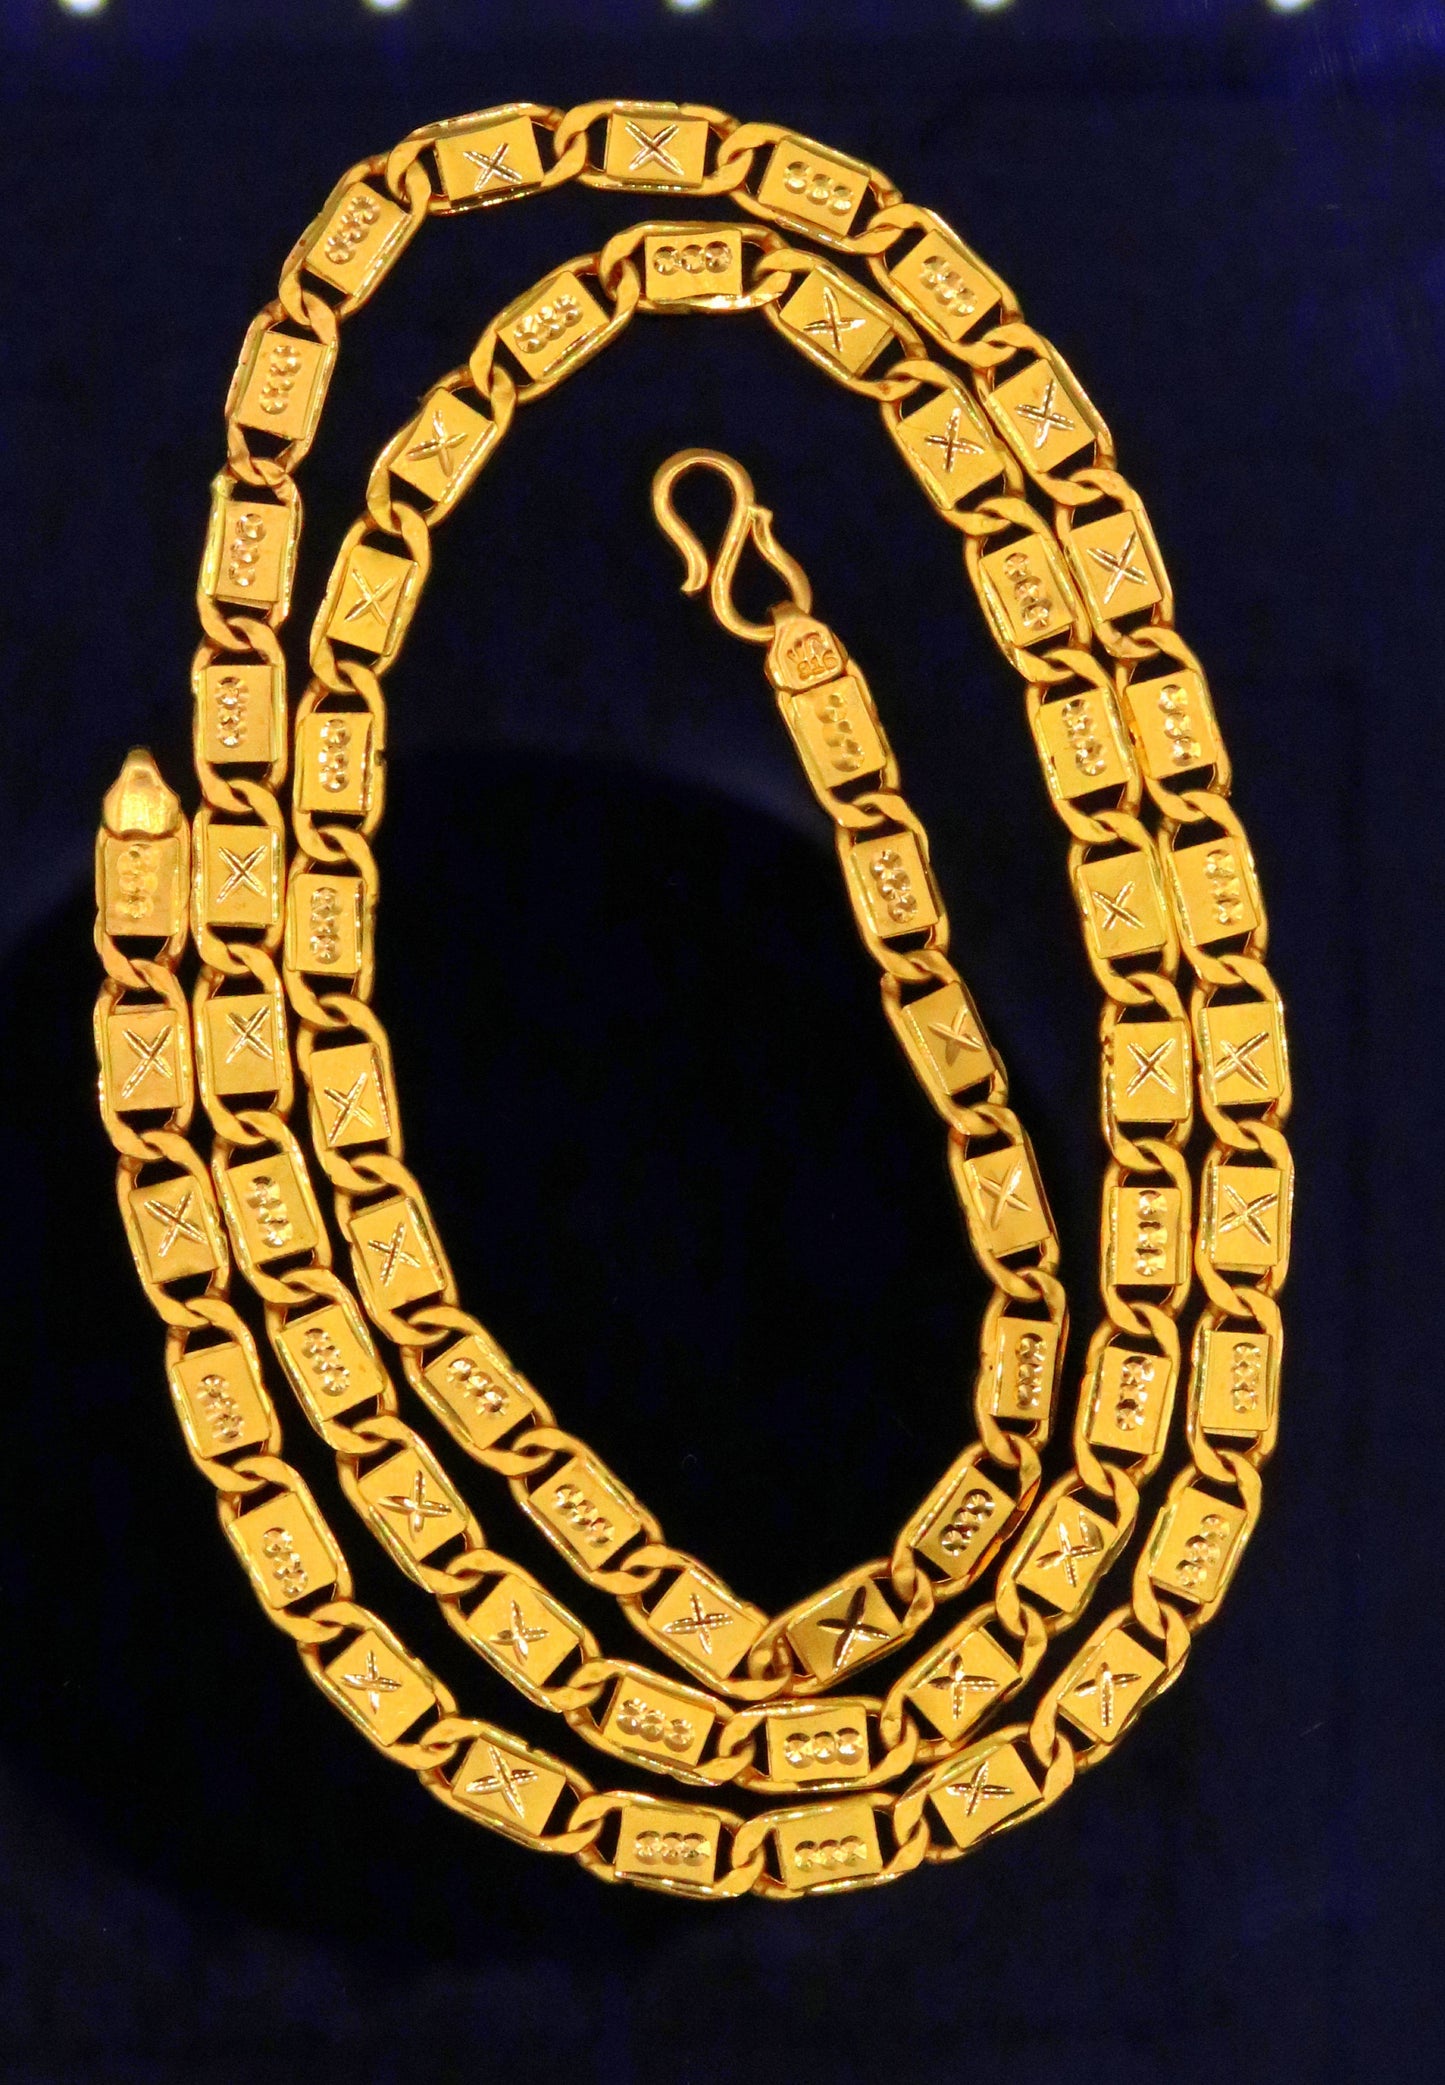 Handmade 22 karat yellow gold 5mm 23 inches solid gold nawabi chain necklace form Rajasthan India ch136 - TRIBAL ORNAMENTS